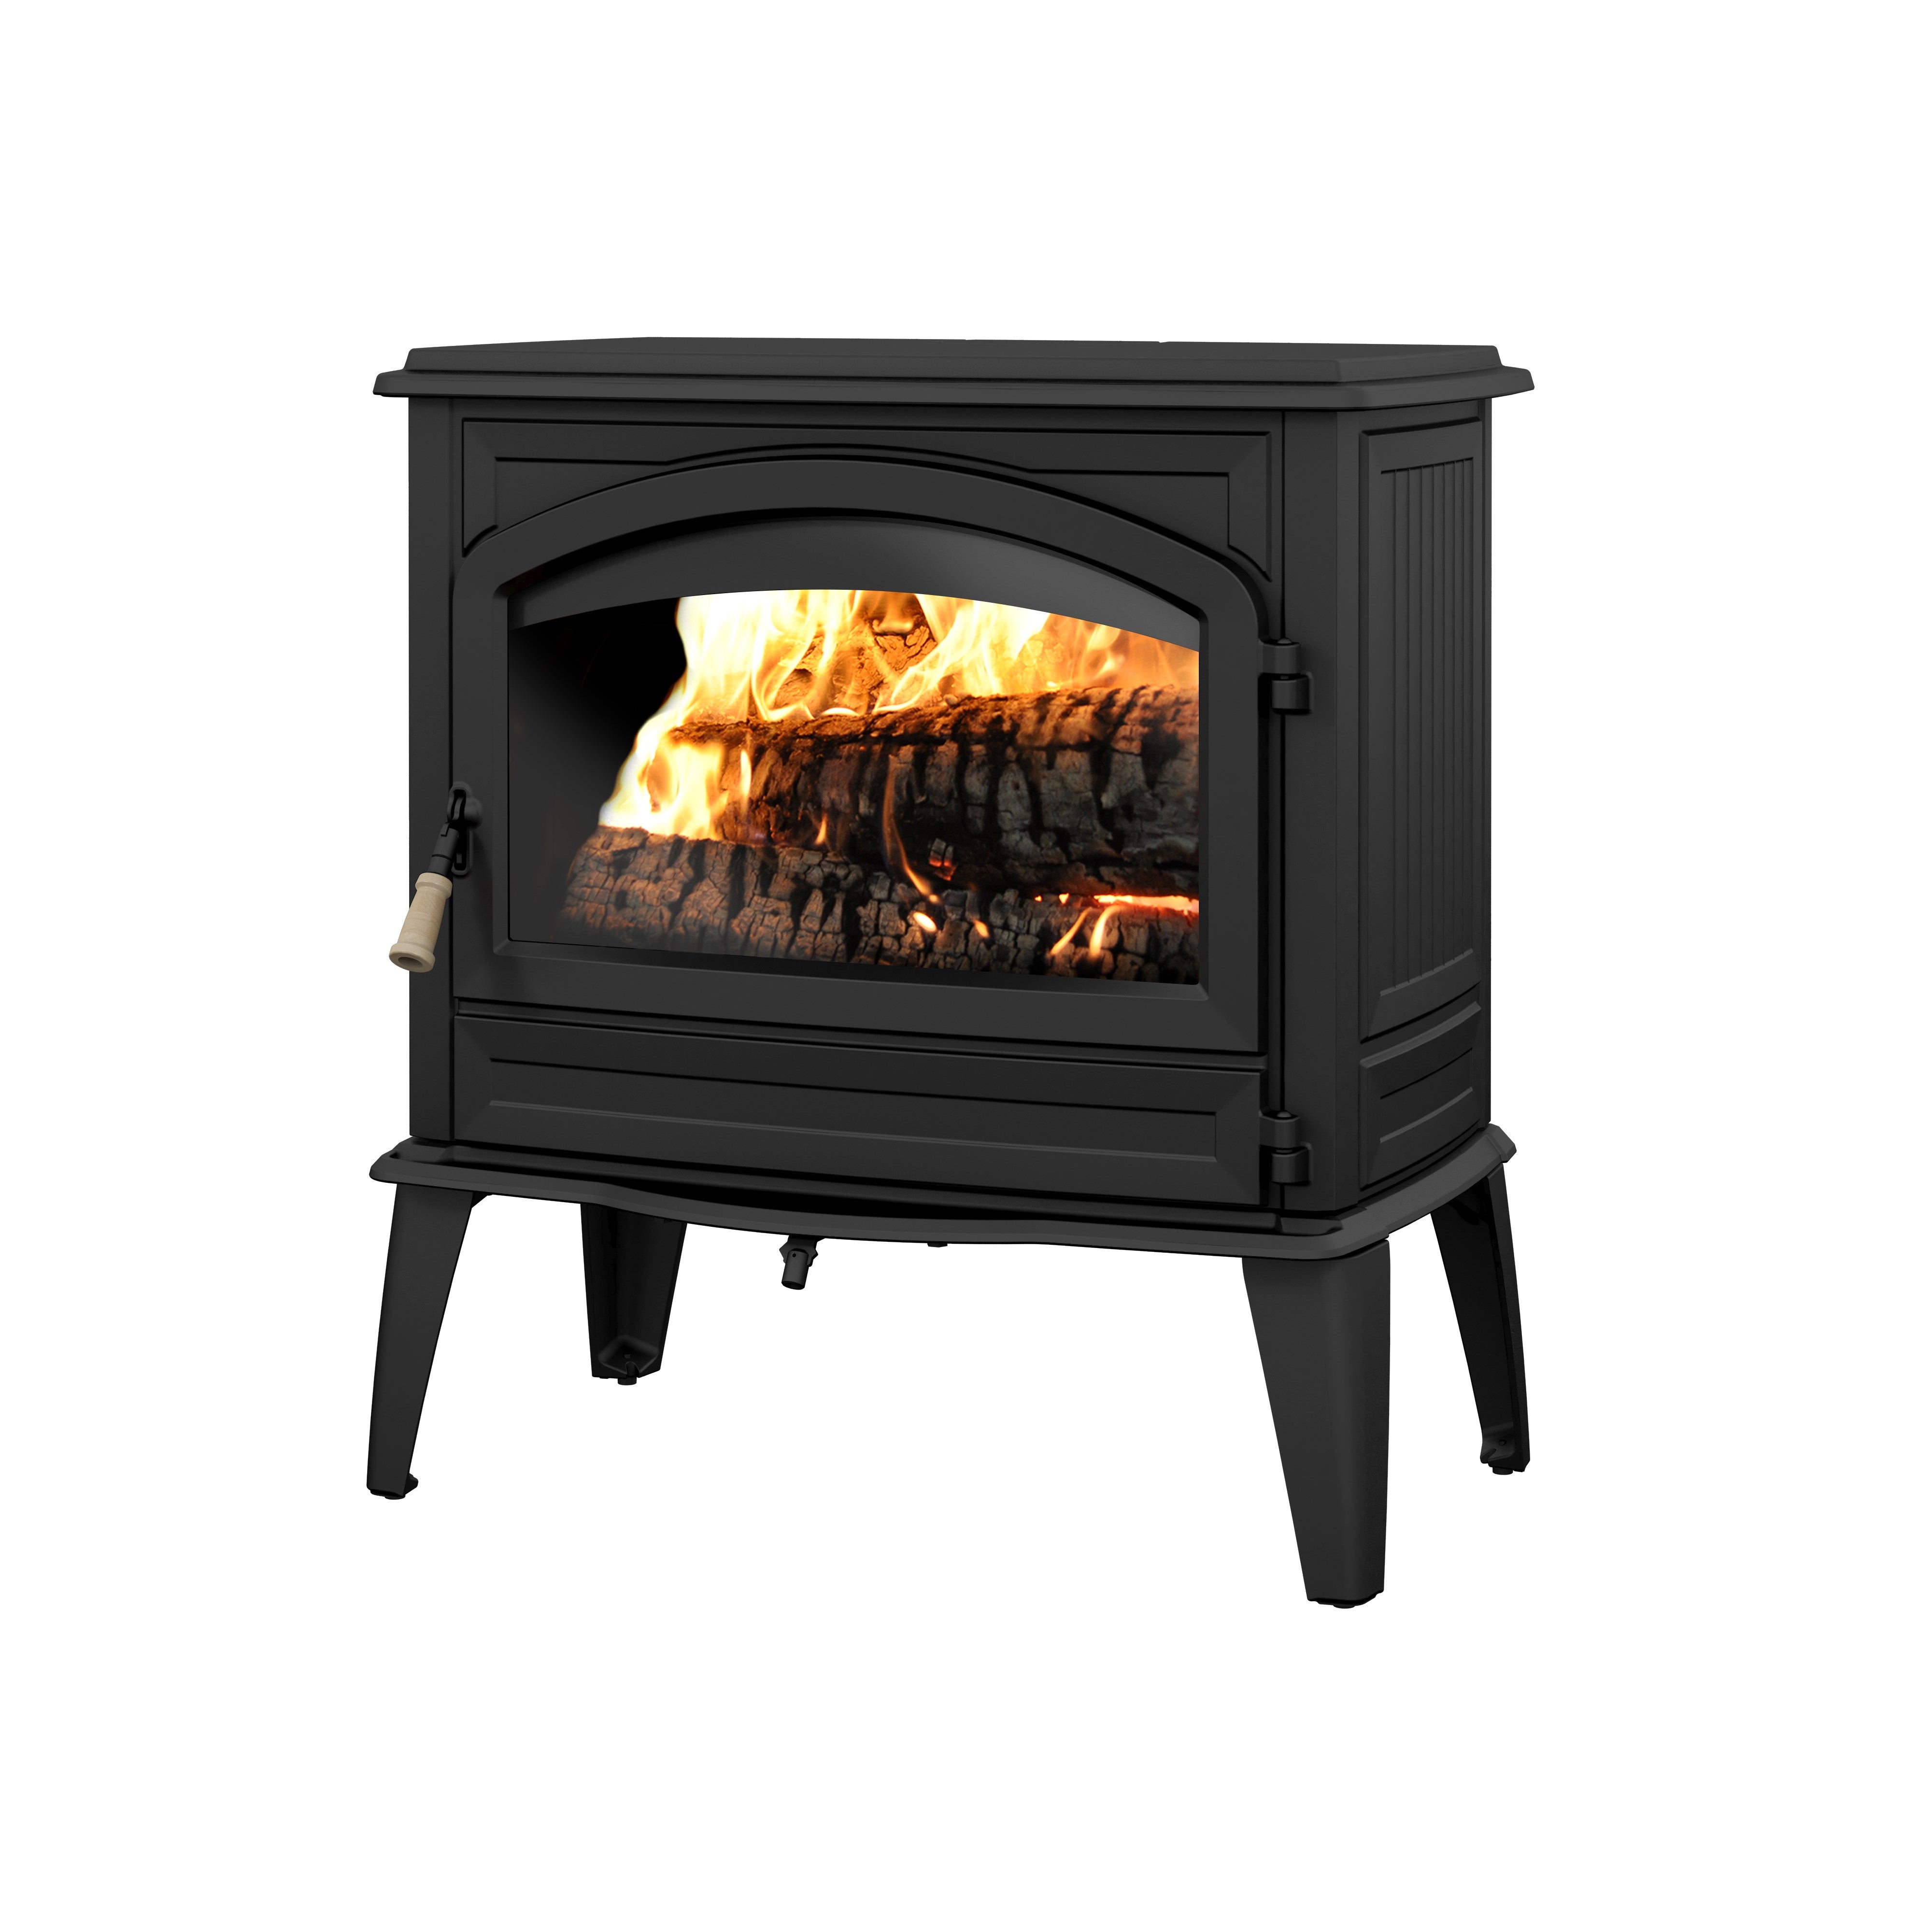 Drolet Cape Town 1800 Cast Iron Wood Stove DB04900 - New Star Living